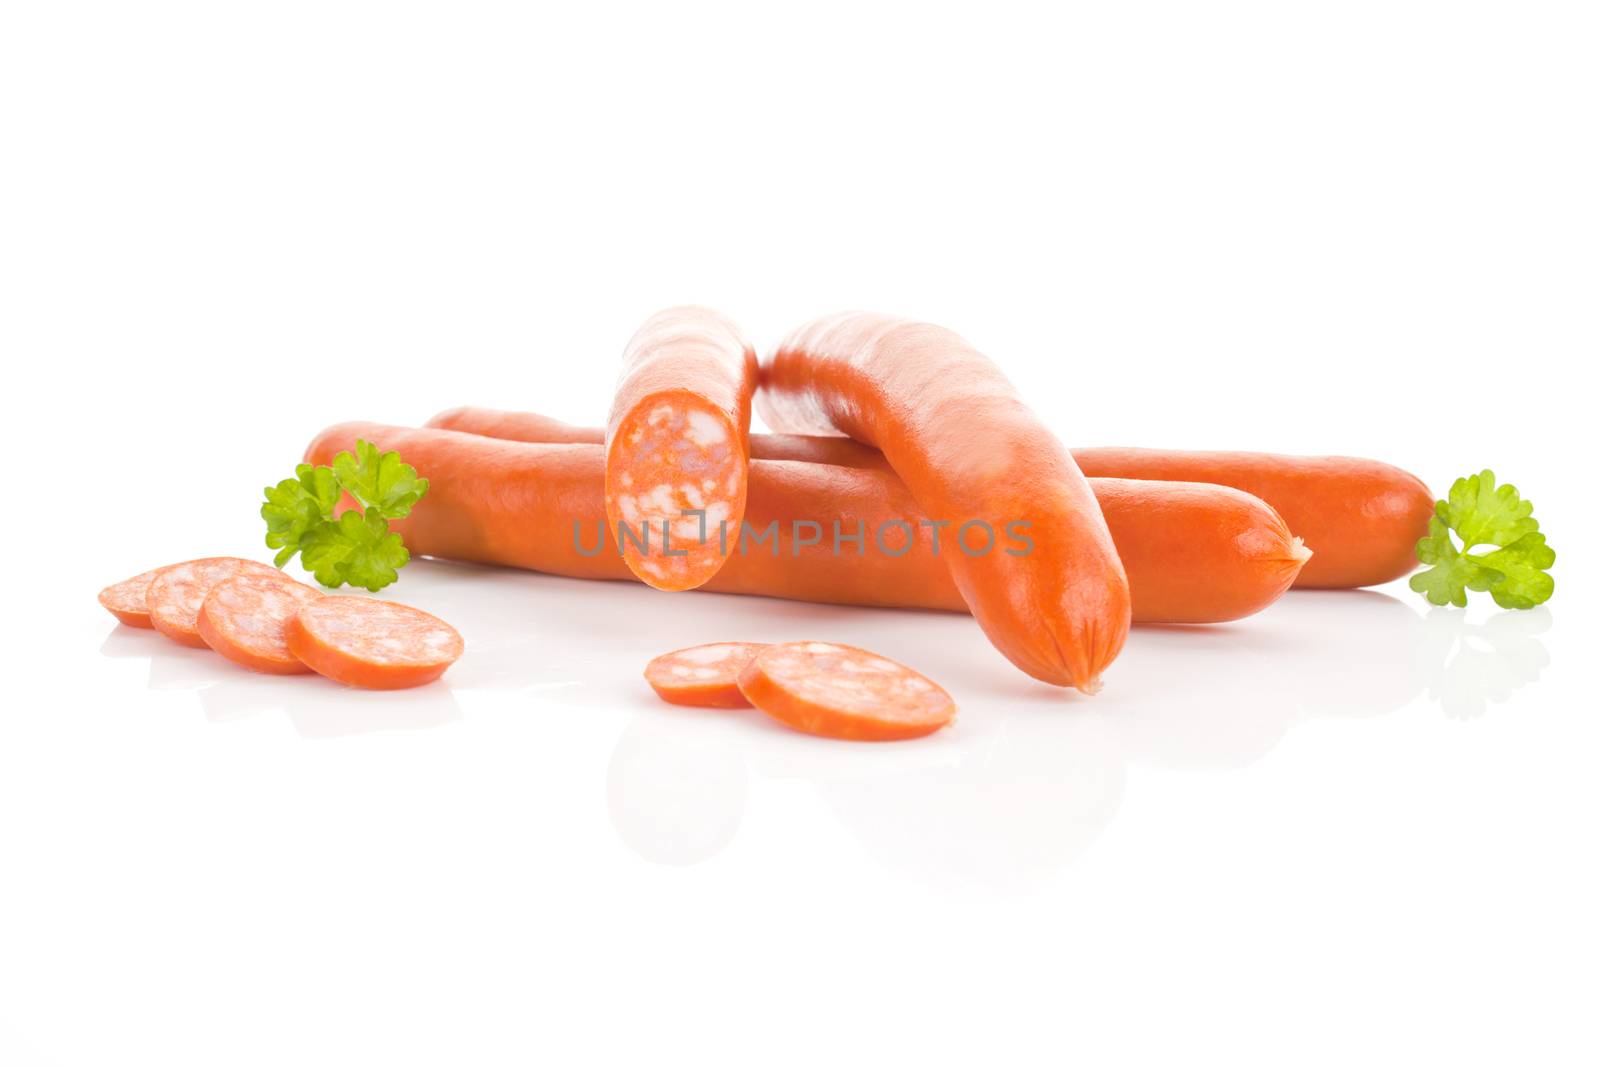 Several sausages isolated on white background. Unhealthy eating.